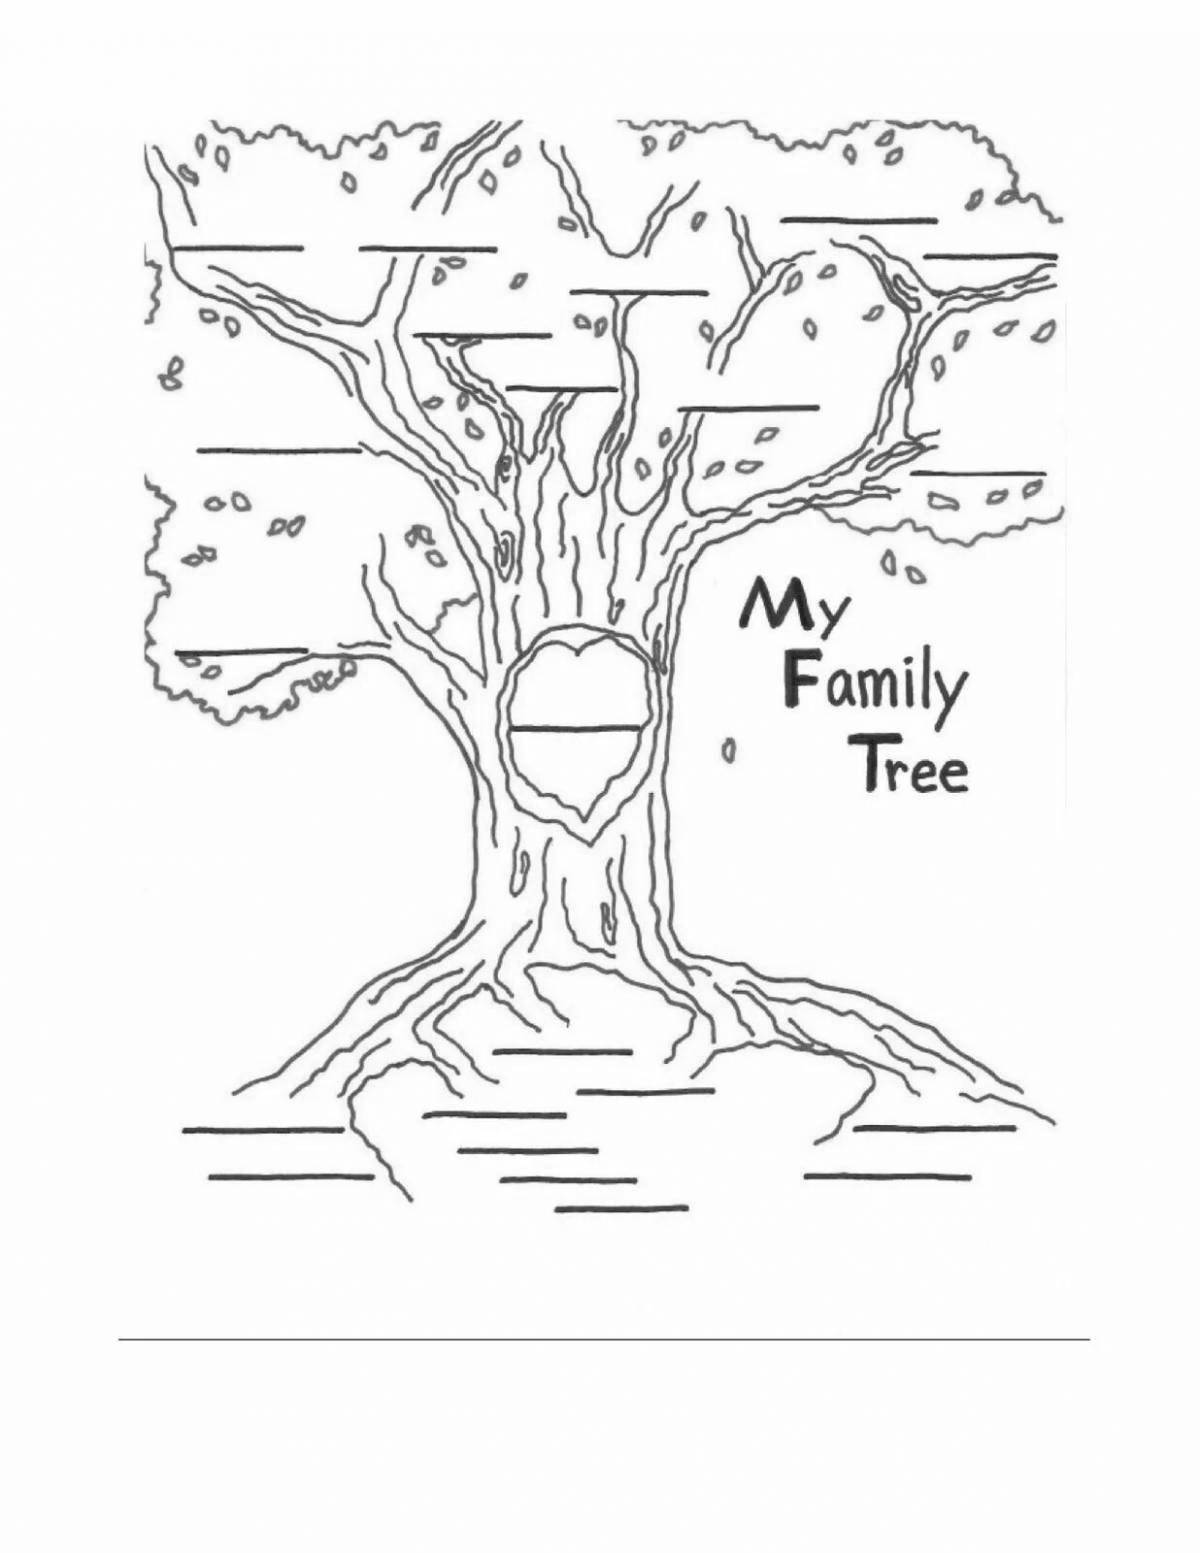 Adorable family tree template to fill out